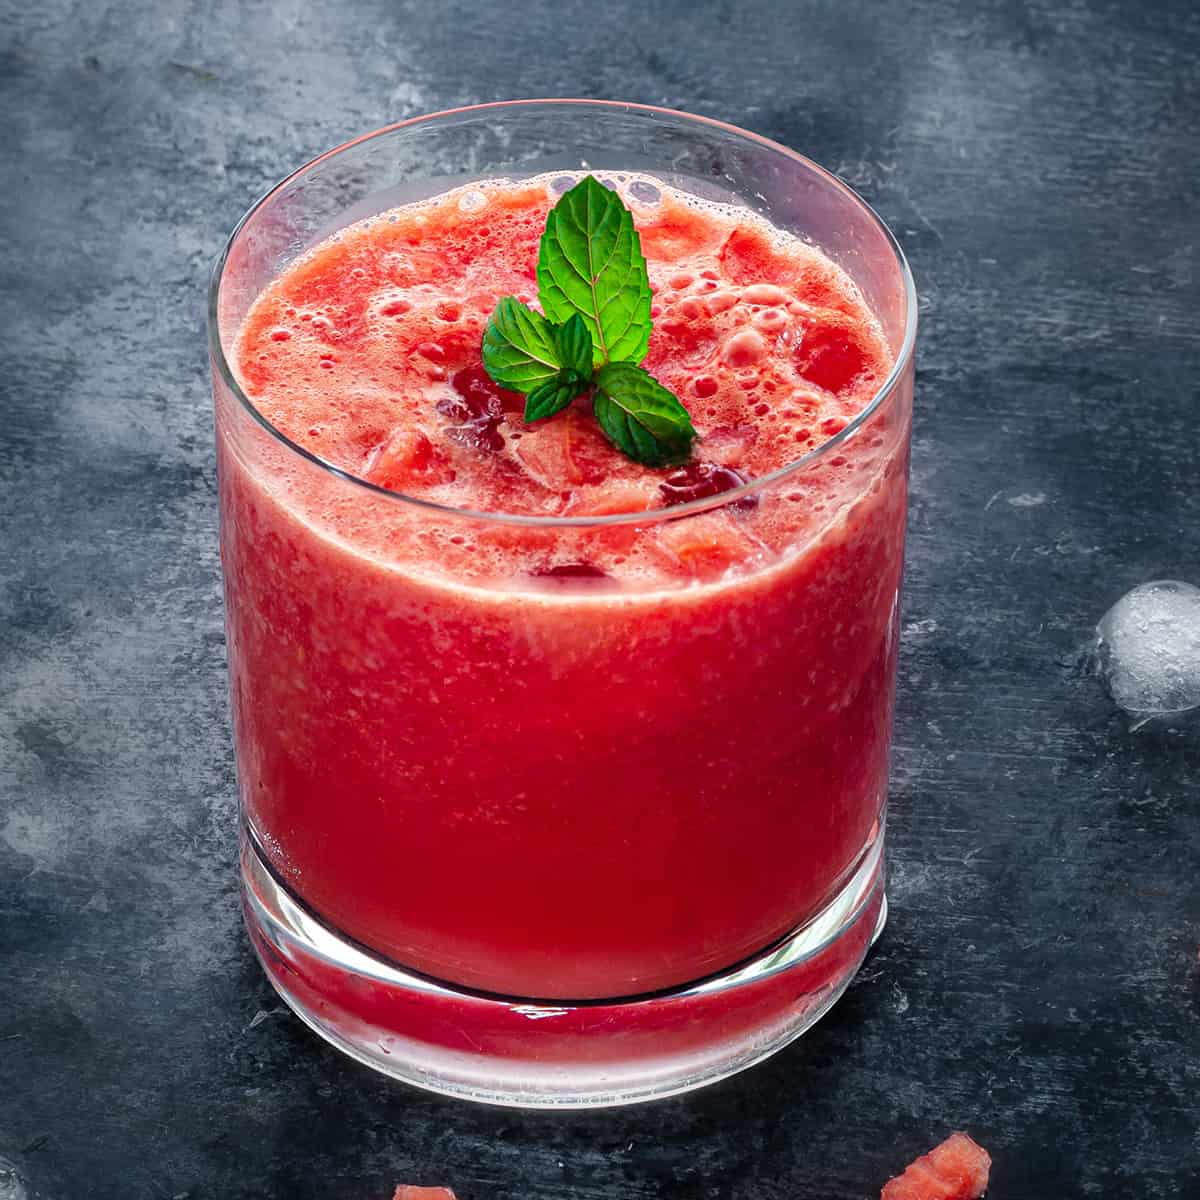 Simple Recipe To Make Watermelon Juice At Home Recipe Typical Of Sabang City